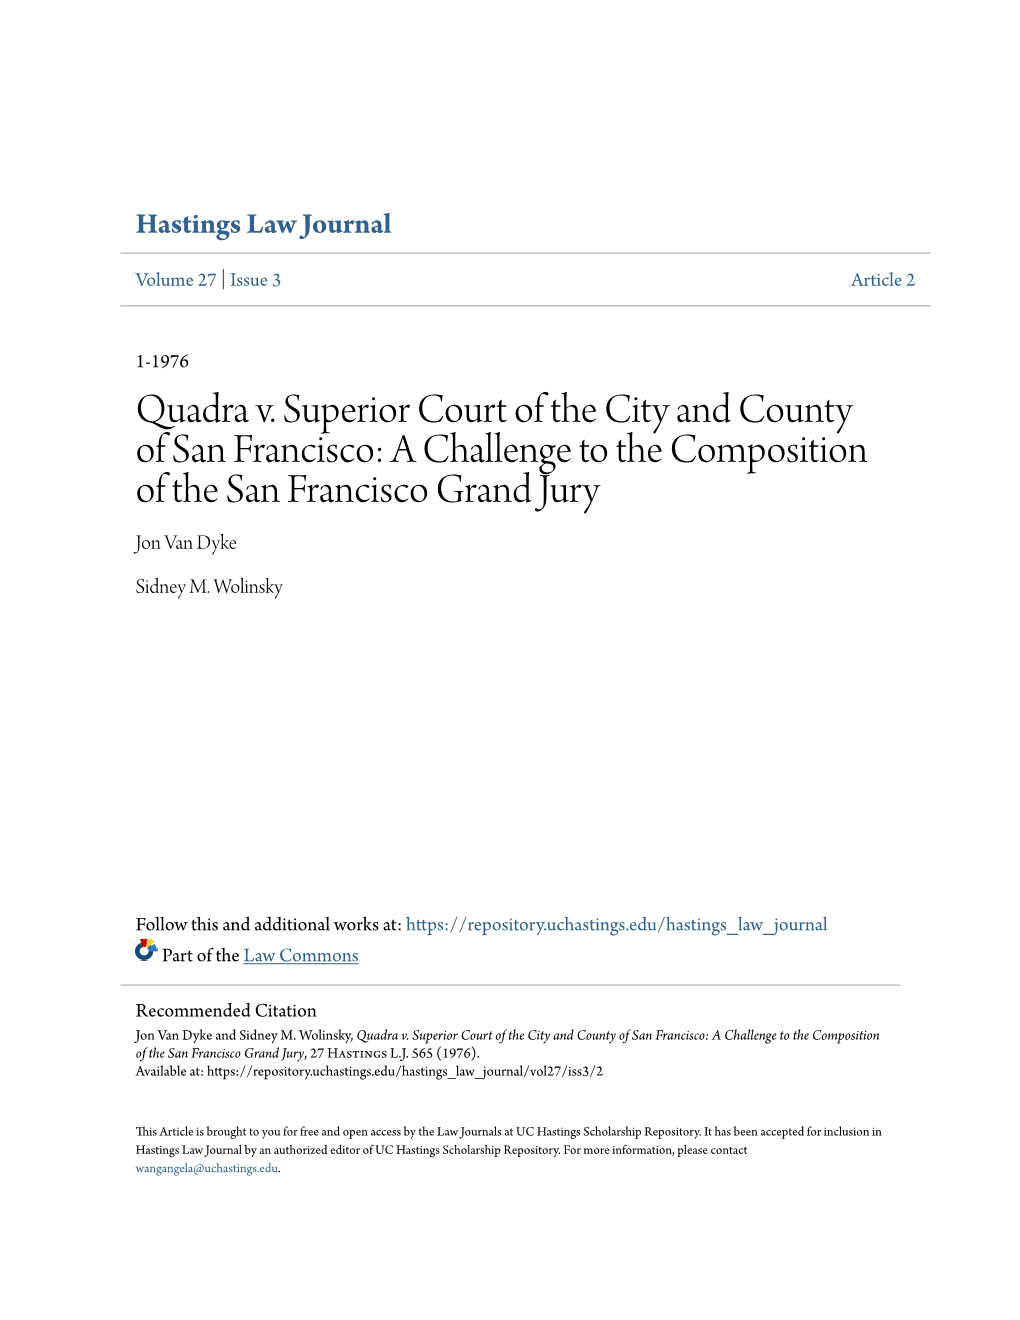 Quadra V. Superior Court of the City and County of San Francisco: a Challenge to the Composition of the San Francisco Grand Jury Jon Van Dyke